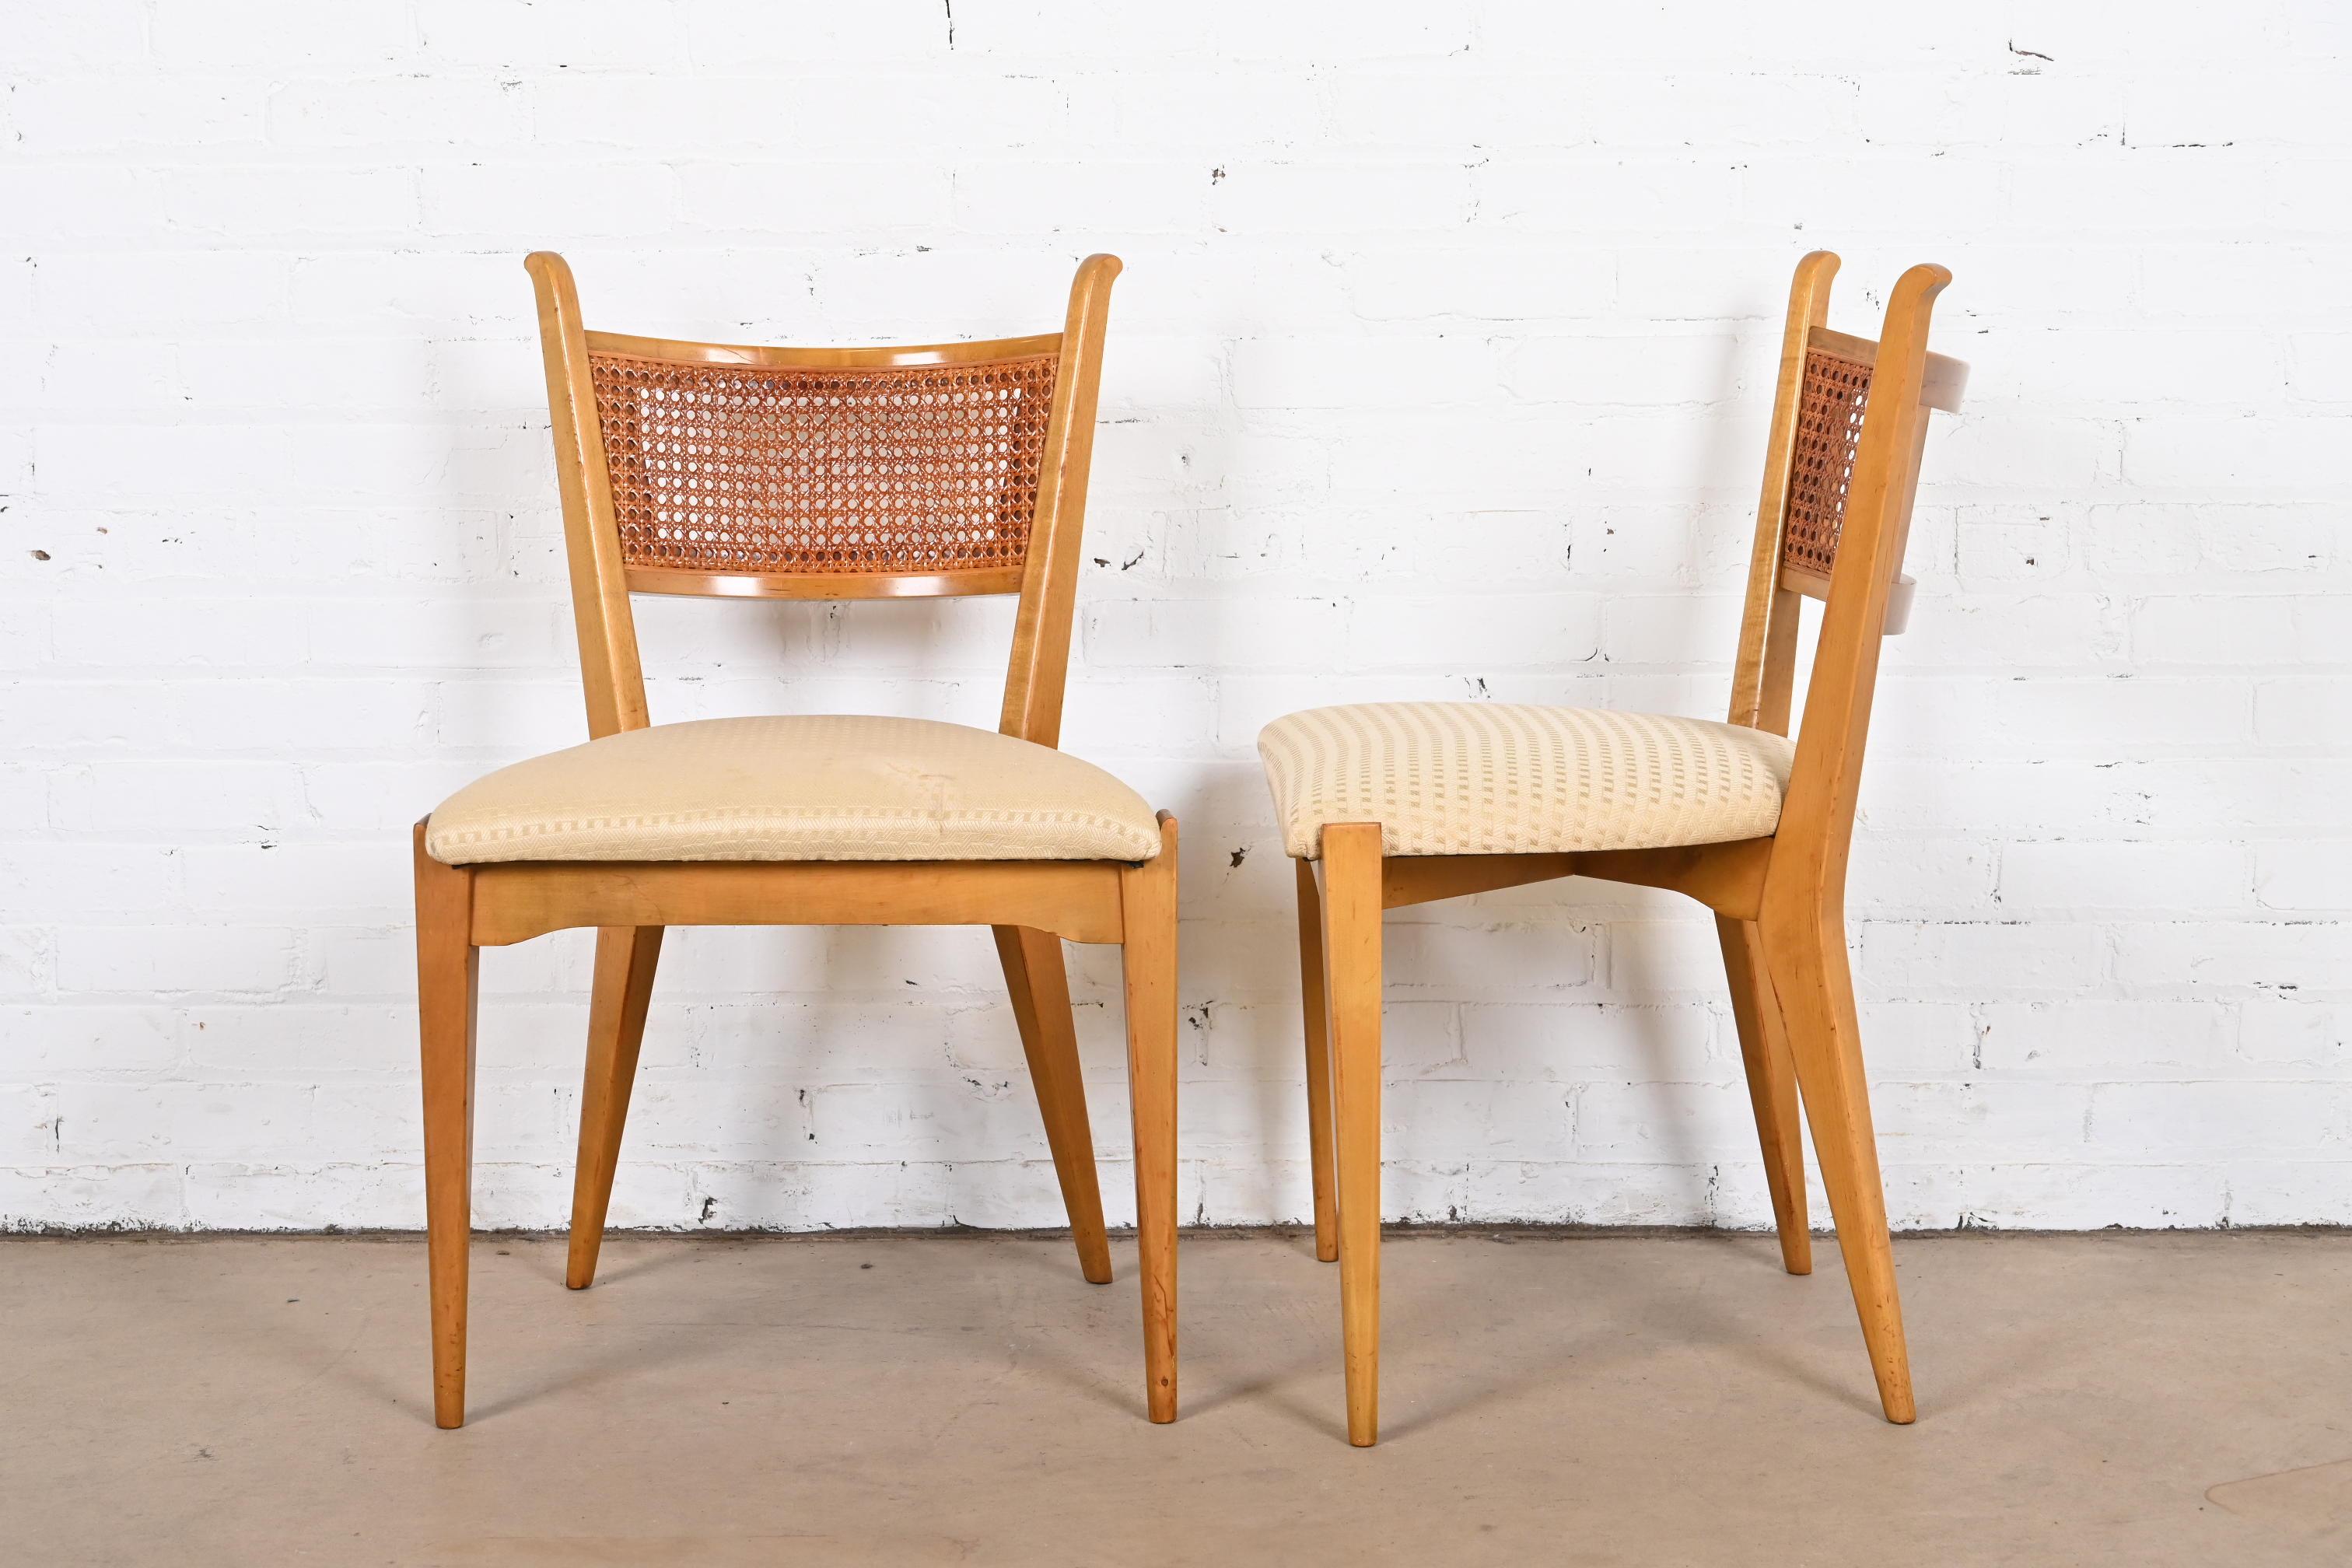 Edmond Spence Swedish Modern Sculpted Maple and Cane Dining Chairs, Set of Four For Sale 4